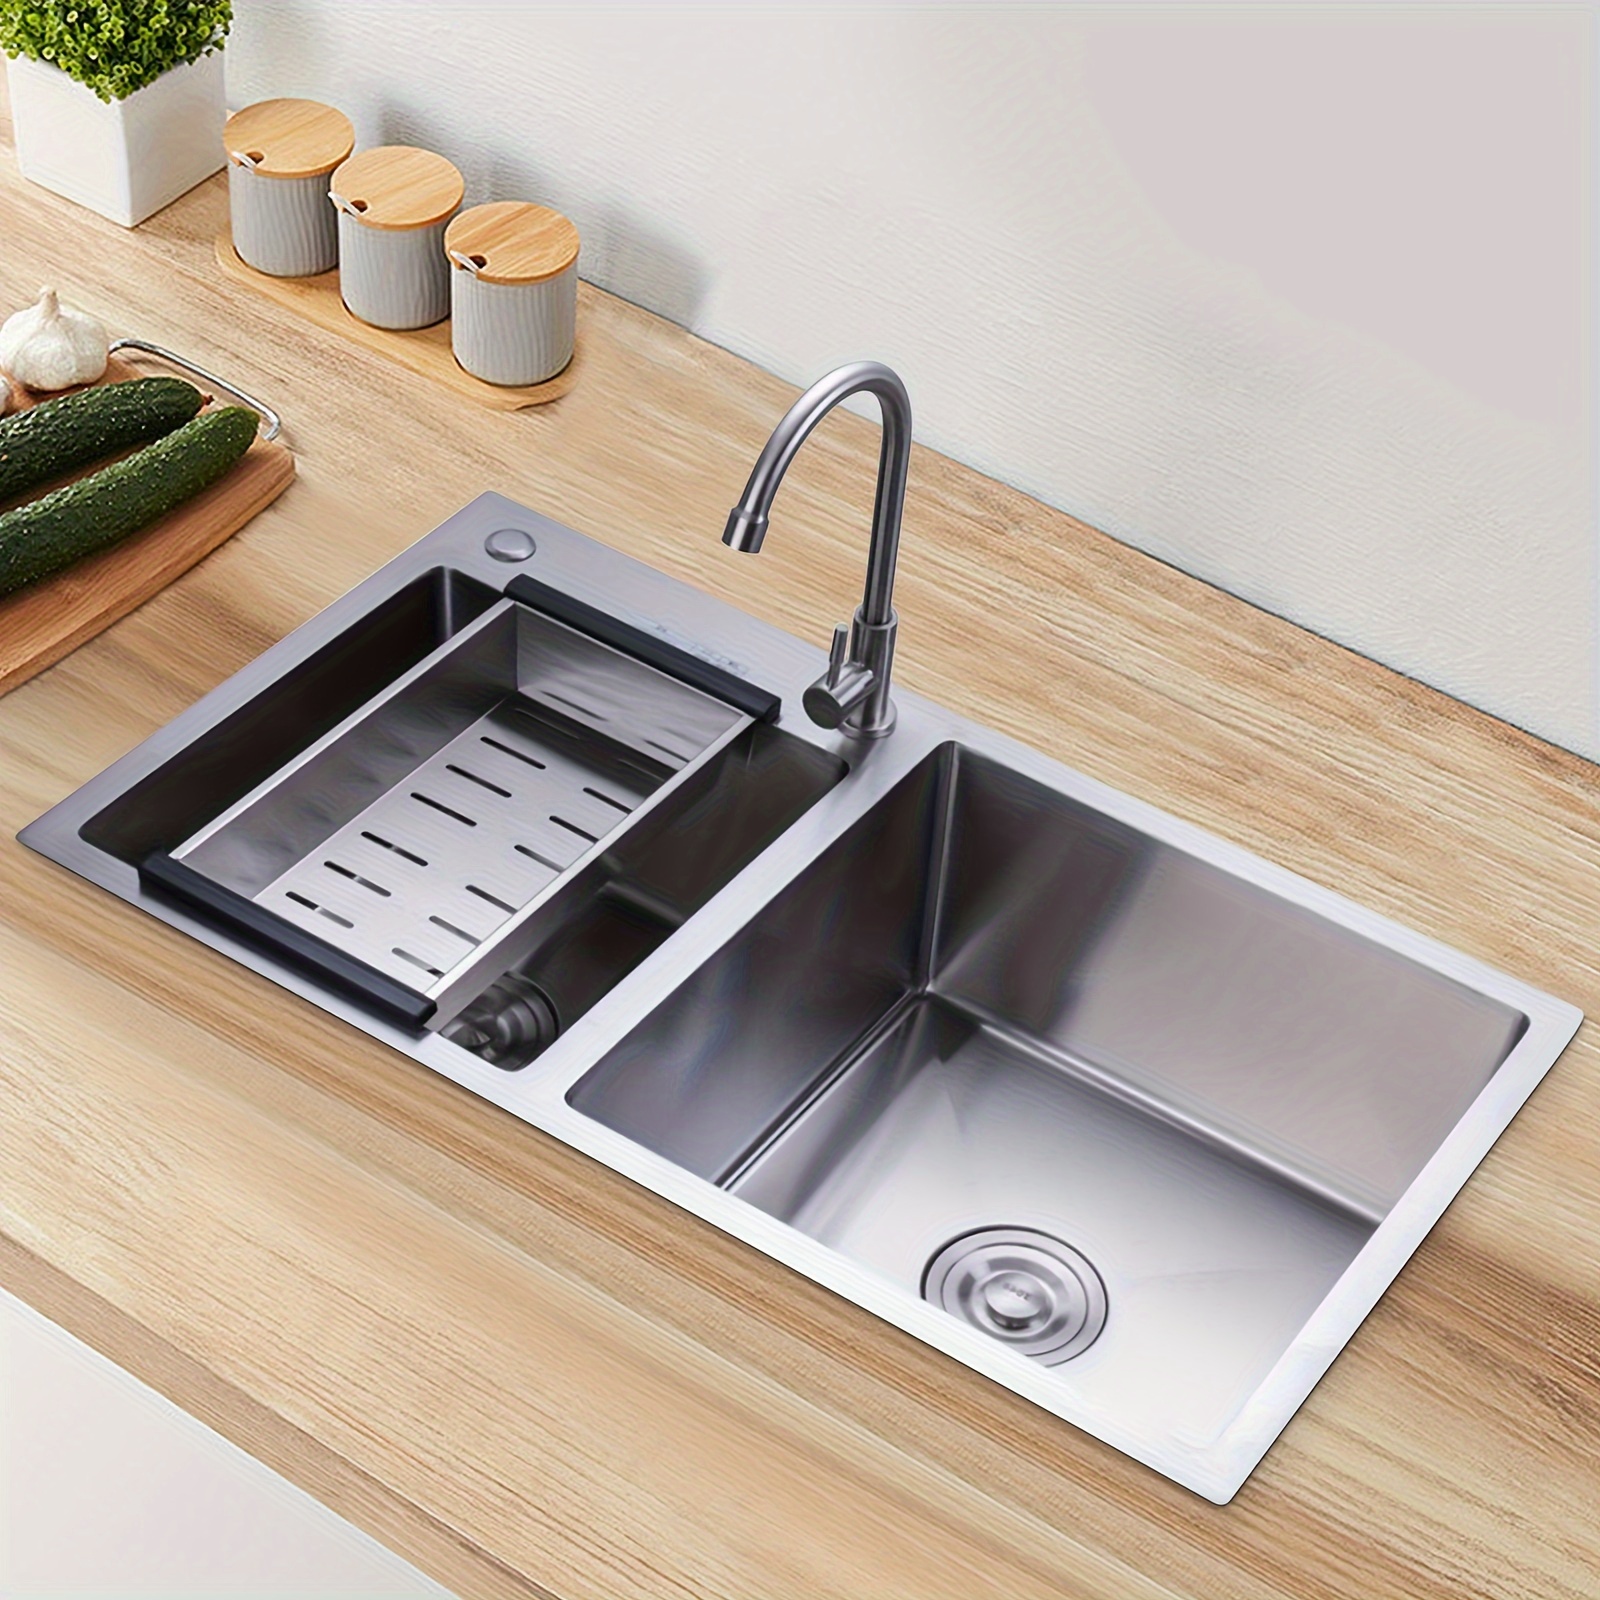 

Double Bowl Composite Drop-in Kitchen Sink 2 Bowl Set Stainless Steel